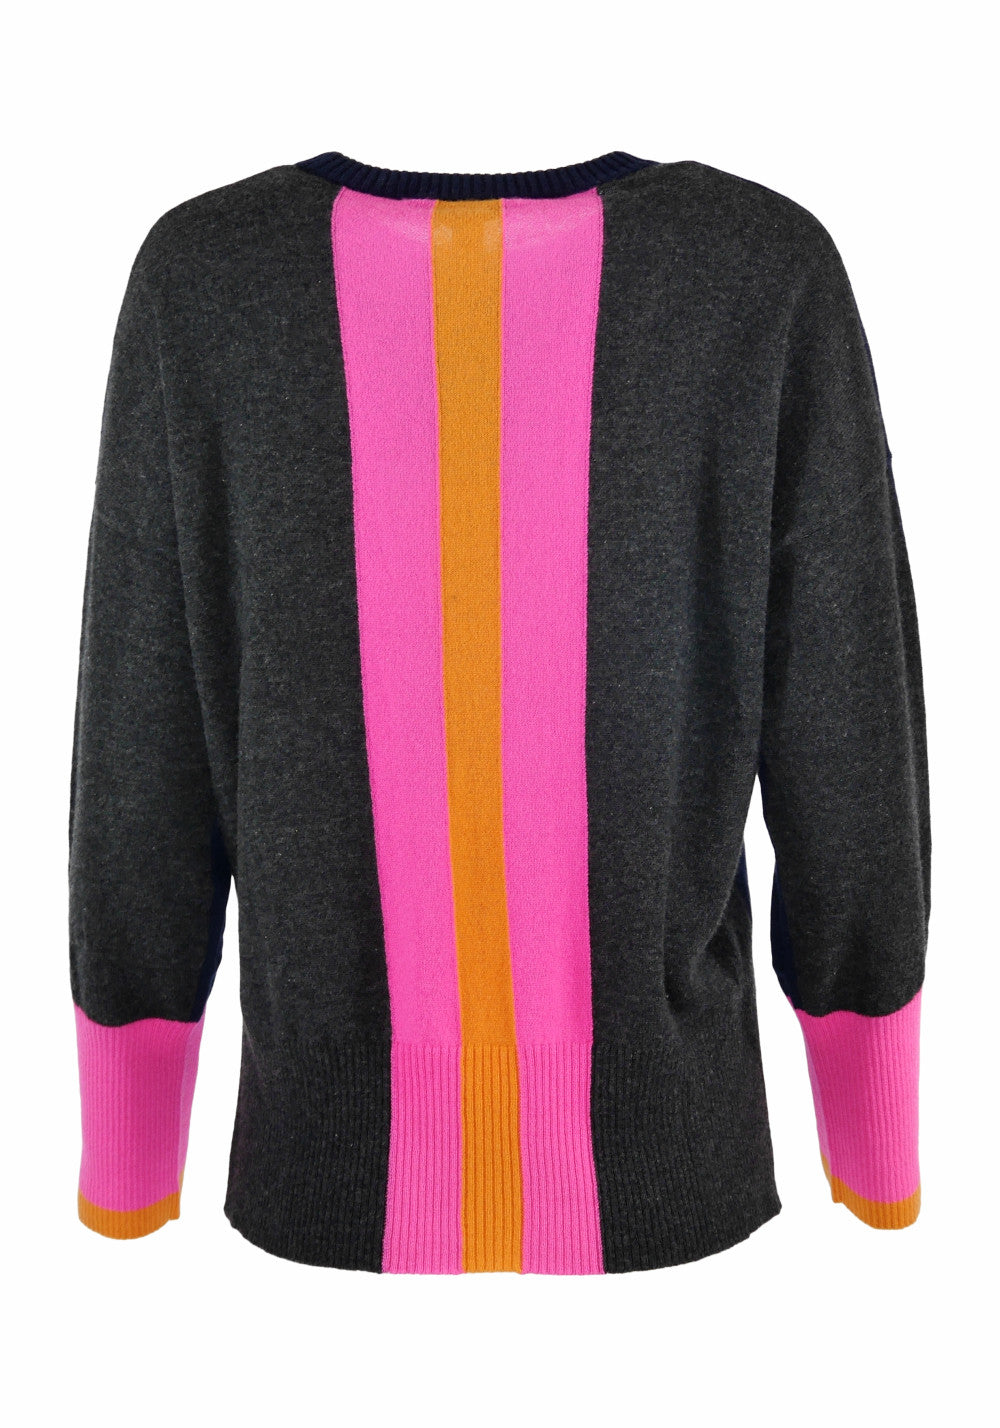 COLOUR BLOCK RELAXED CREW WITH RACING STRIPE - AUTUMN CASHMERE